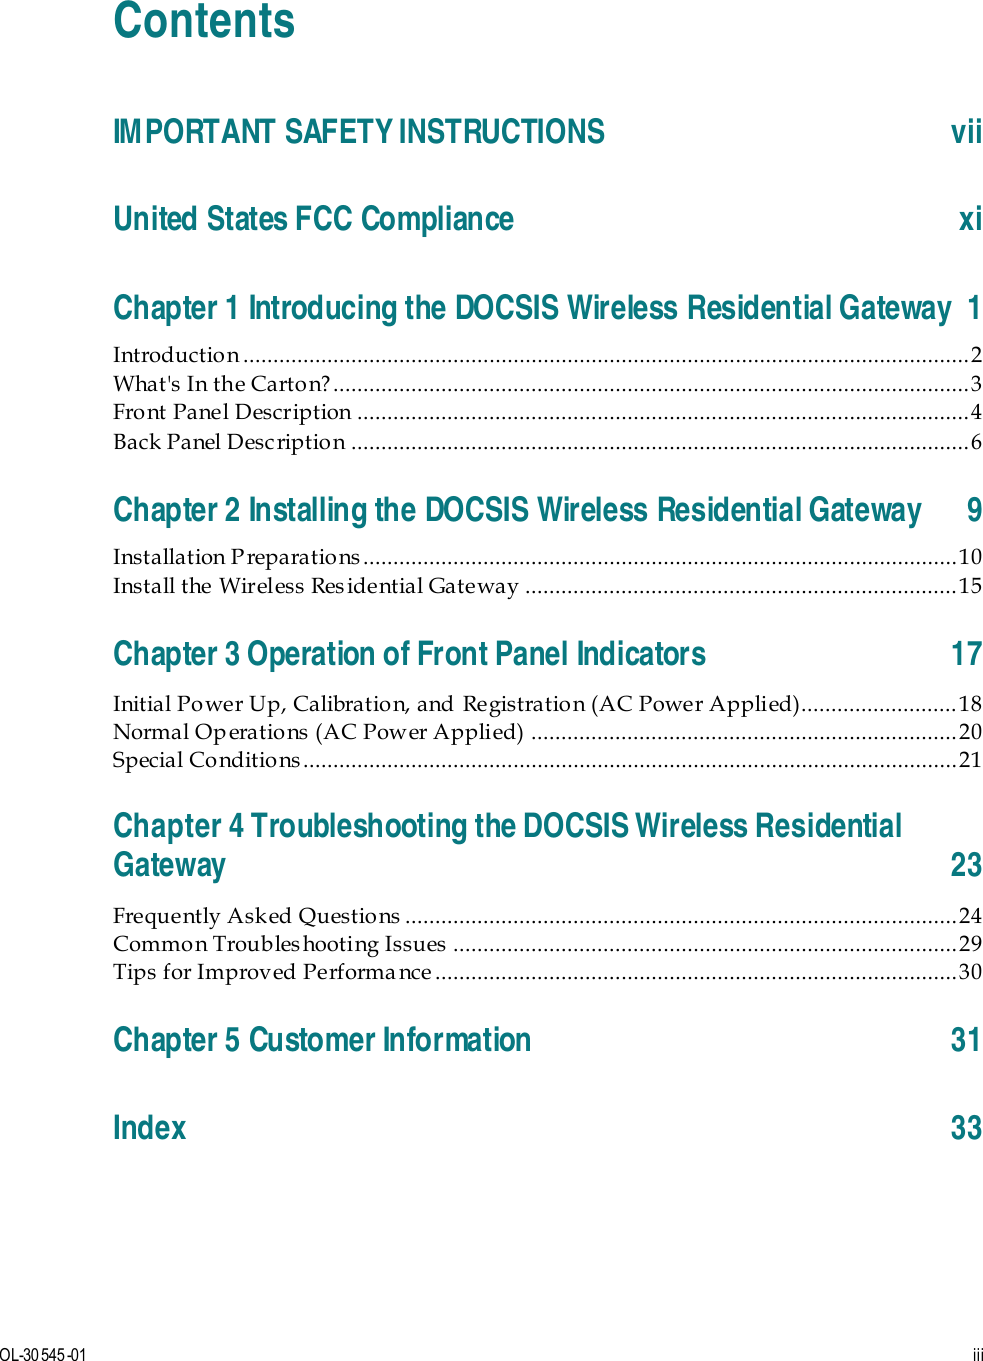   OL-30 545-01  iii  Contents IMPORTANT SAFETY INSTRUCTIONS vii United States FCC Compliance xi Chapter 1 Introducing the DOCSIS Wireless Residential Gateway  1 Introduction ......................................................................................................................... 2 What&apos;s In the Carto n? .......................................................................................................... 3 Front Panel Description ...................................................................................................... 4 Back Panel Desc ription ....................................................................................................... 6 Chapter 2 Installing the DOCSIS Wireless Residential Gateway  9 Installation P reparations................................................................................................... 10 Install the Wireless Res idential Gateway ........................................................................ 15 Chapter 3 Operation of Front Panel Indicators 17 Initial Power Up, Calibration, and Registration (AC Power Applied).......................... 18 Normal Op eratio ns (AC Power Applied)  ....................................................................... 20 Special Conditio ns ............................................................................................................. 21 Chapter 4 Troubleshooting the DOCSIS Wireless Residential Gateway 23 Frequently Ask ed Questio ns  ............................................................................................ 24 Common Troubleshooting Issues .................................................................................... 29 Tips for Improved Performa nce ....................................................................................... 30 Chapter 5 Customer Information 31 Index 33   